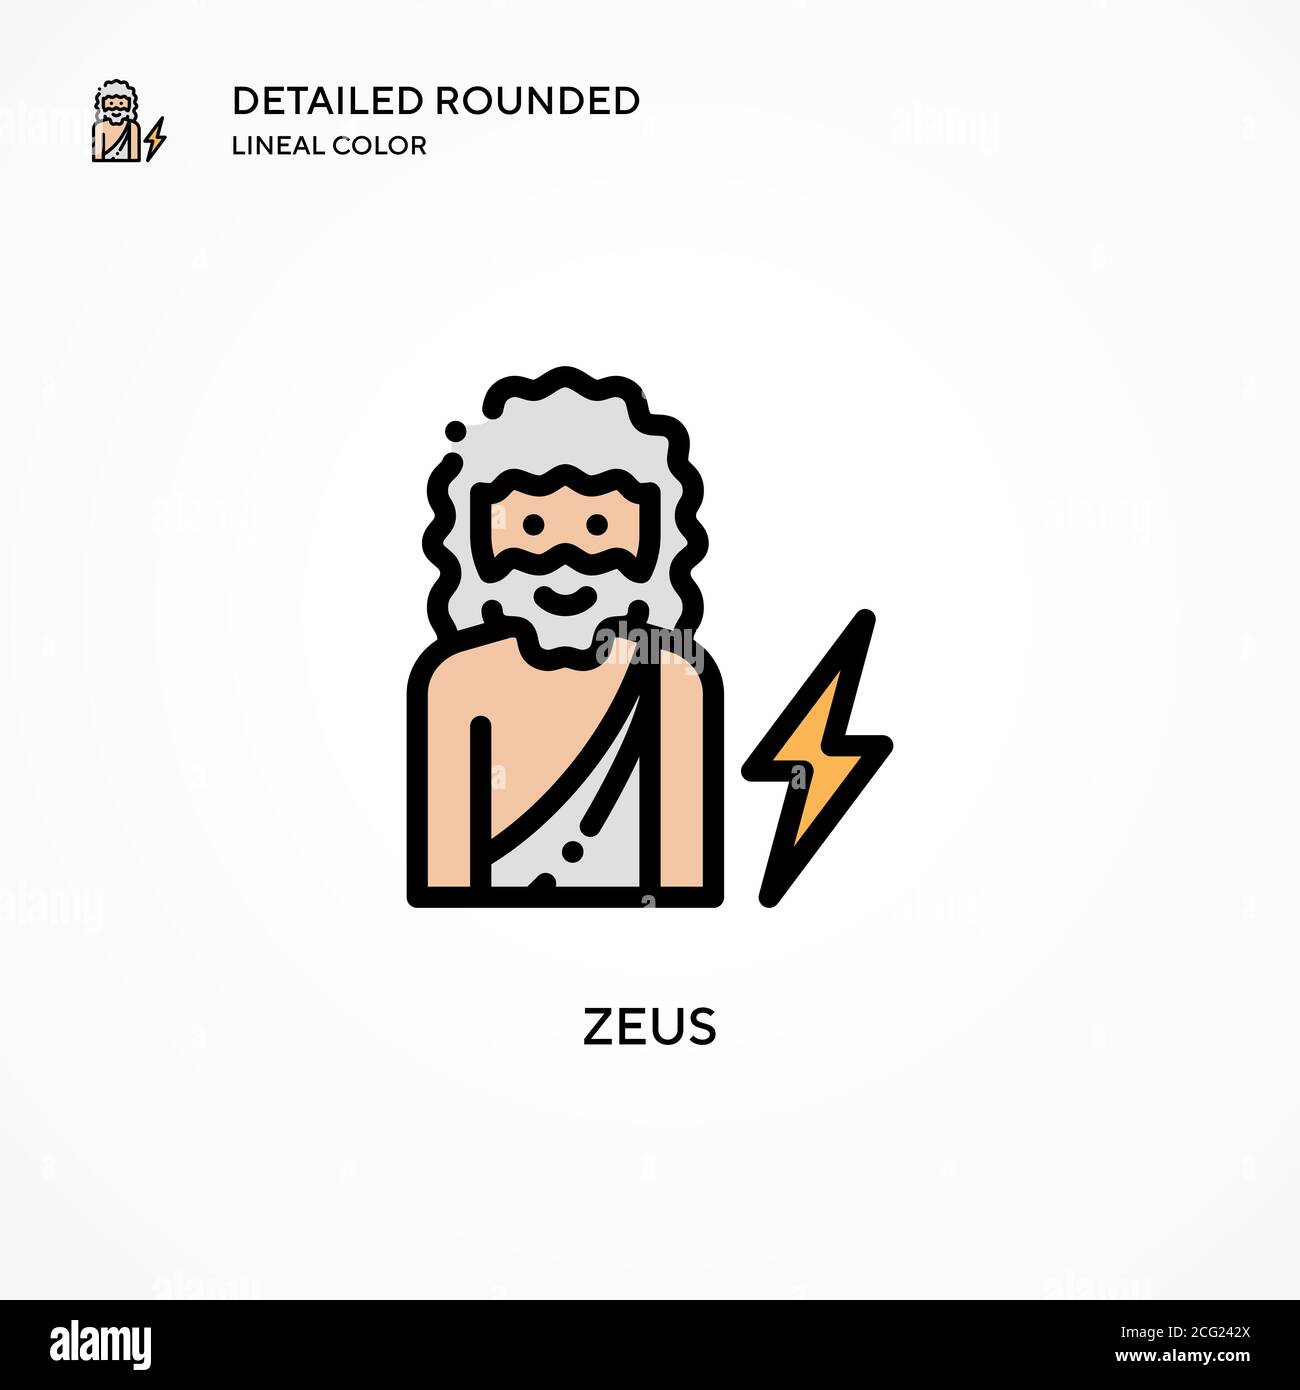 Zeus vector icon. Modern vector illustration concepts. Easy to edit and customize. Stock Vector